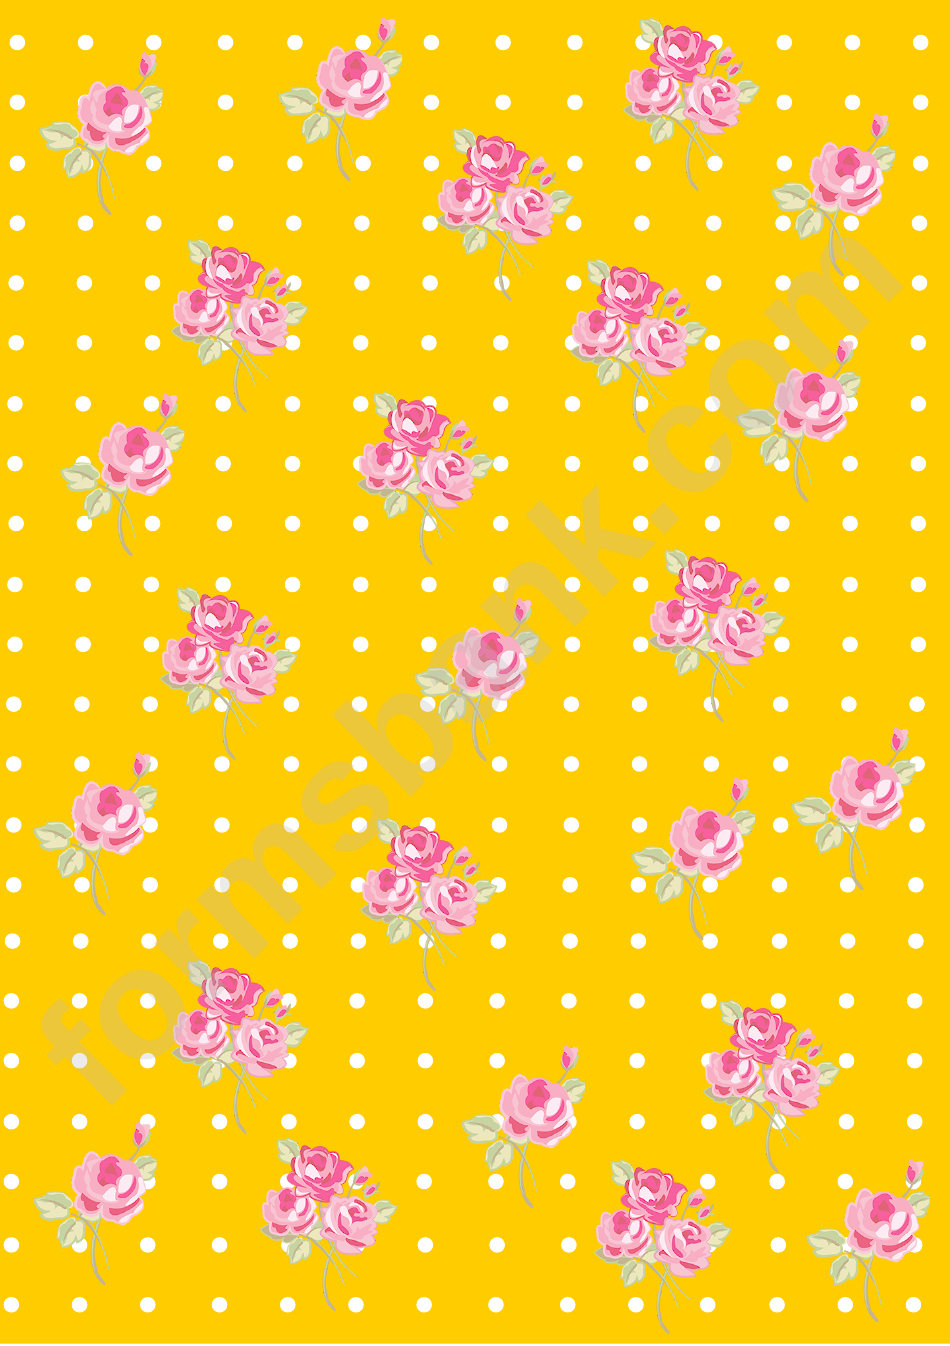 Flowers On Yellow Dotted Background Template